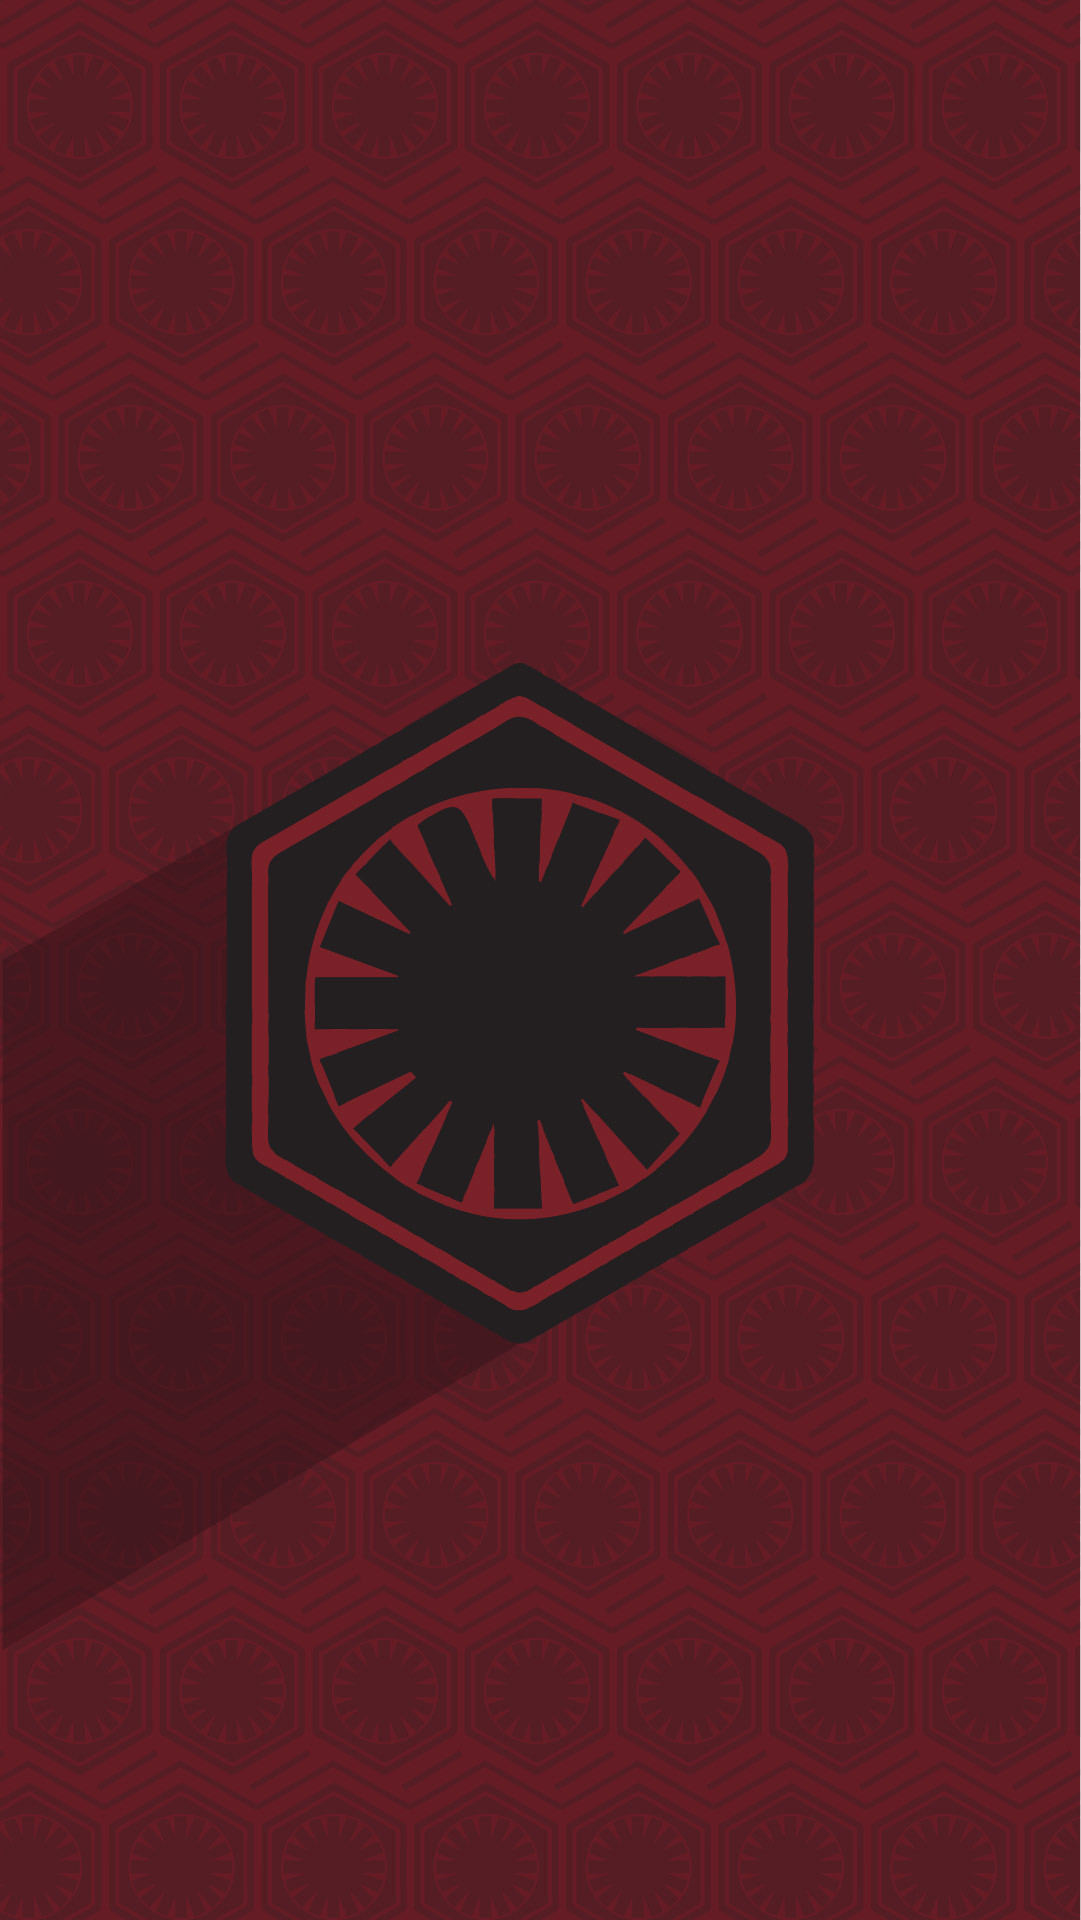 1081x1920 All Star Wars, all the time.